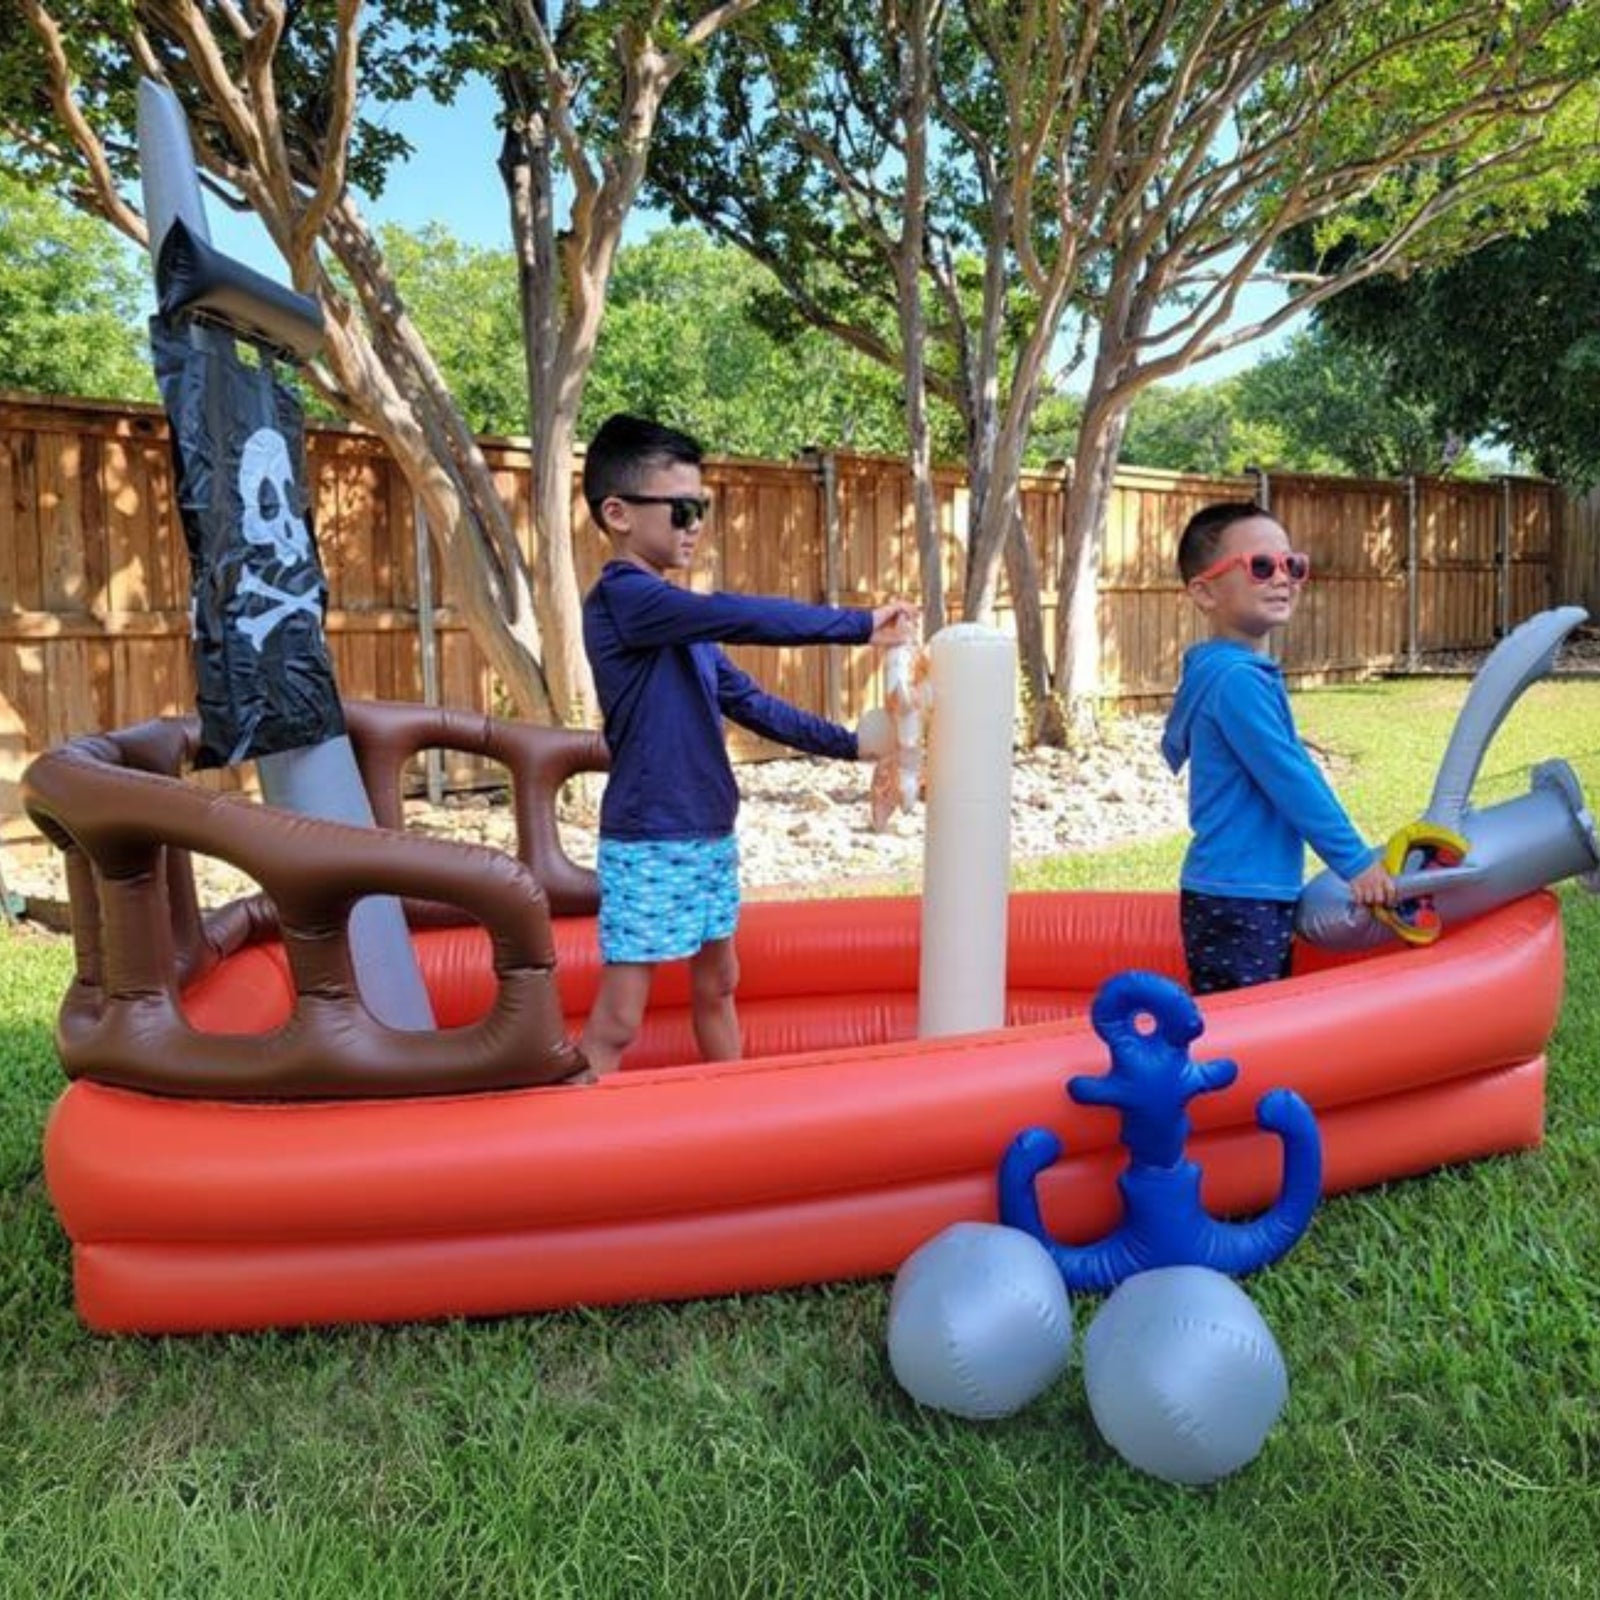 two boys play with the inflatable pirate boat